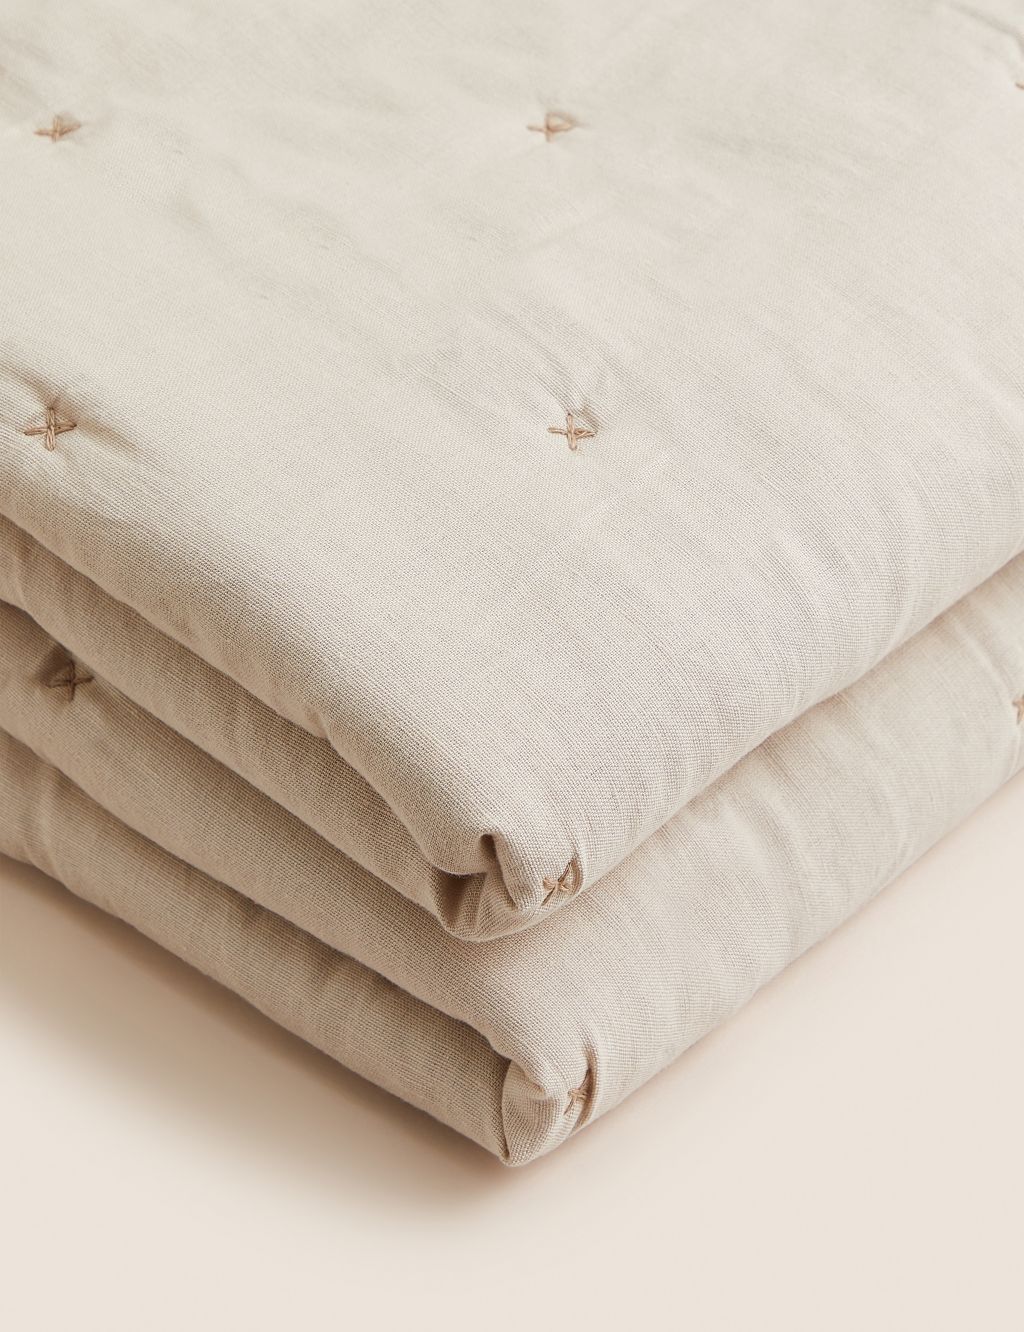 Cotton with Linen Bedspread image 5